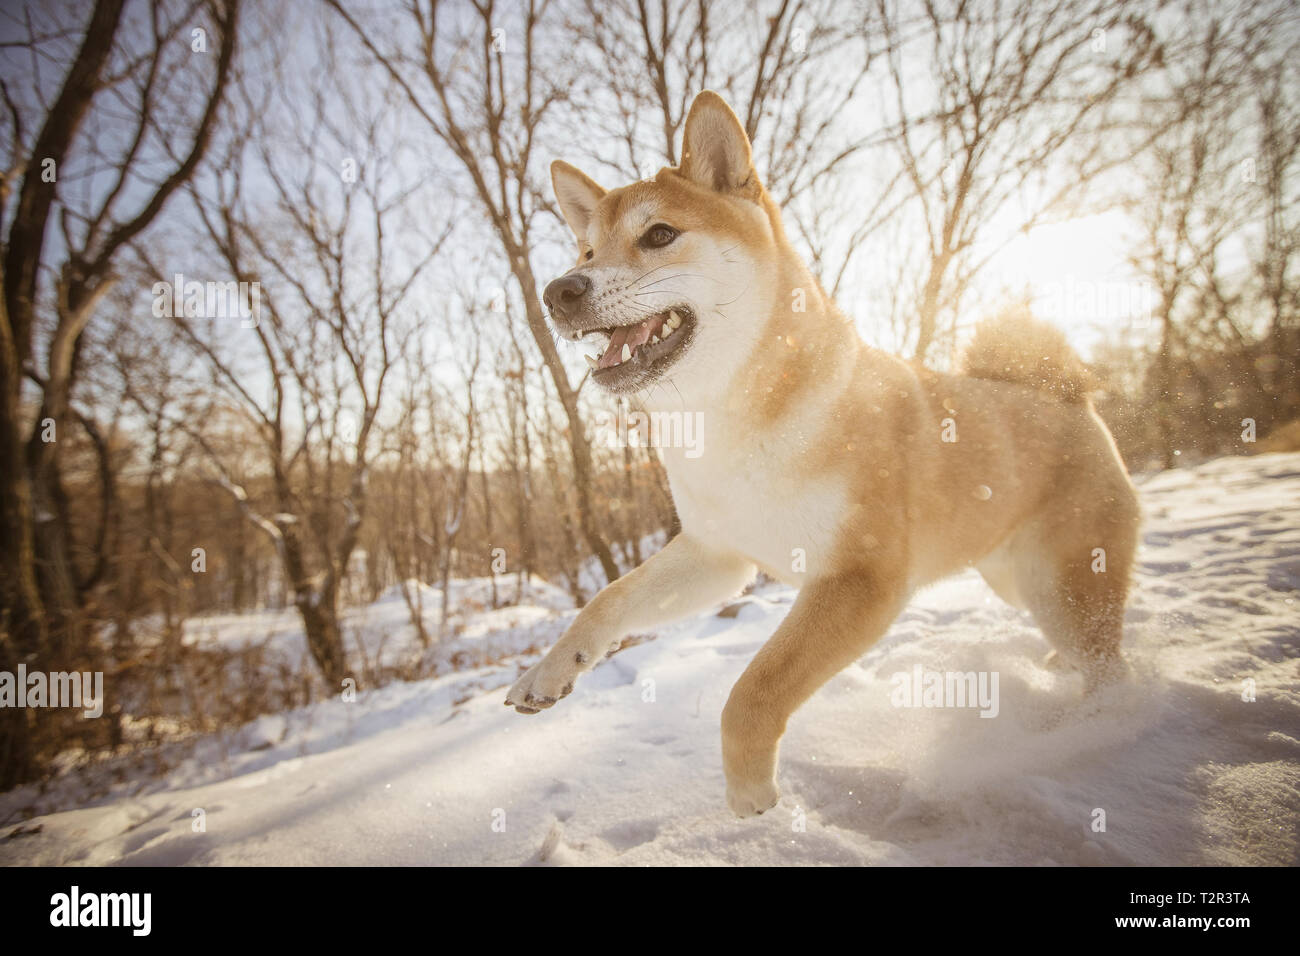 Porait of Dog. Dog runs on the snow ground in the forest Stock Photo